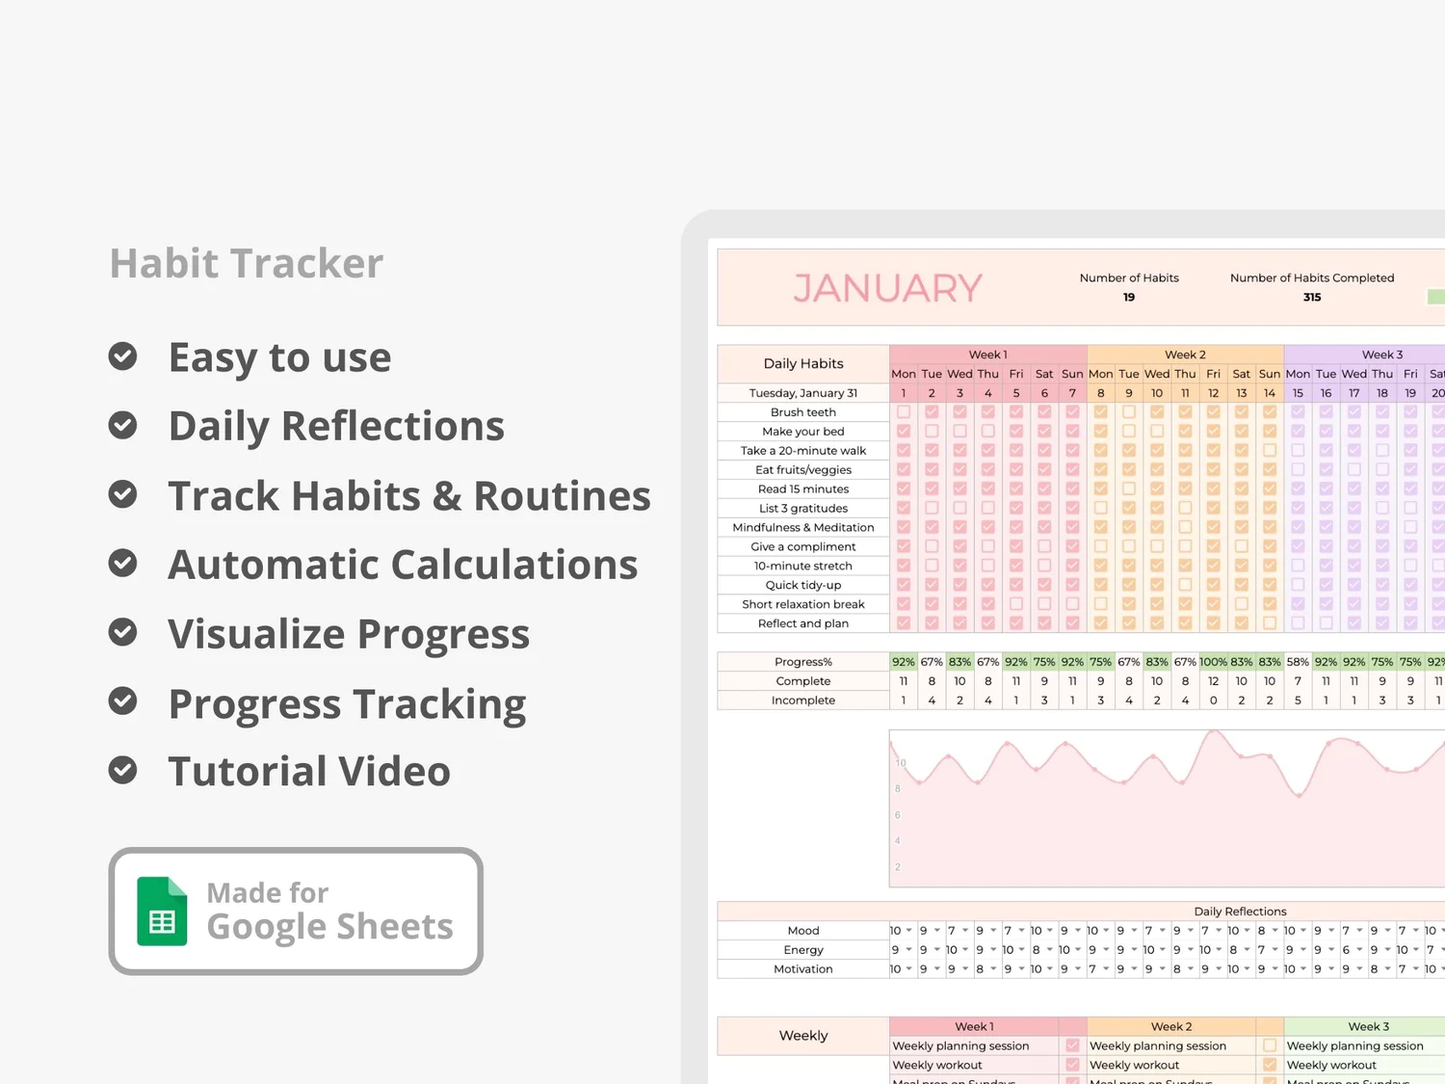 The Ultimate Productivity Planner